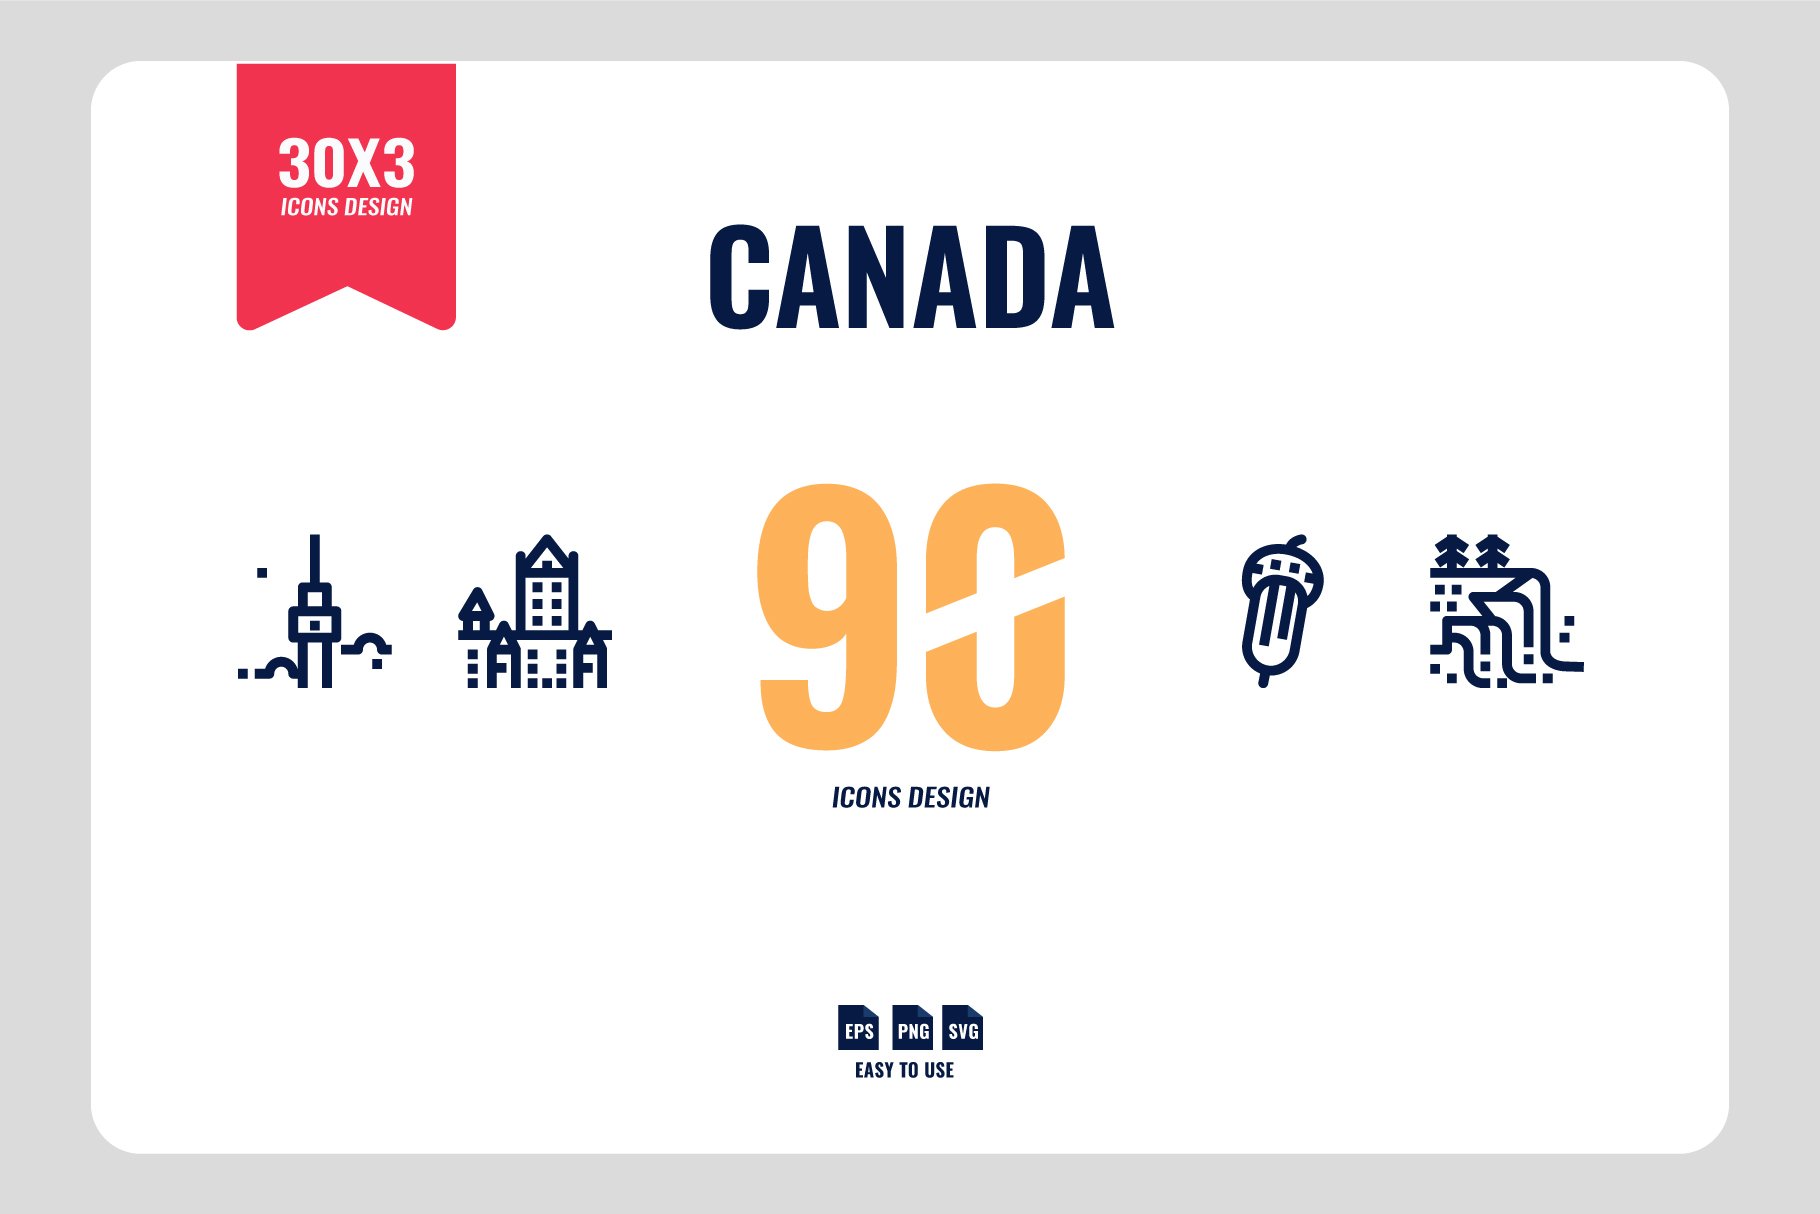 Canada 90 Icons cover image.